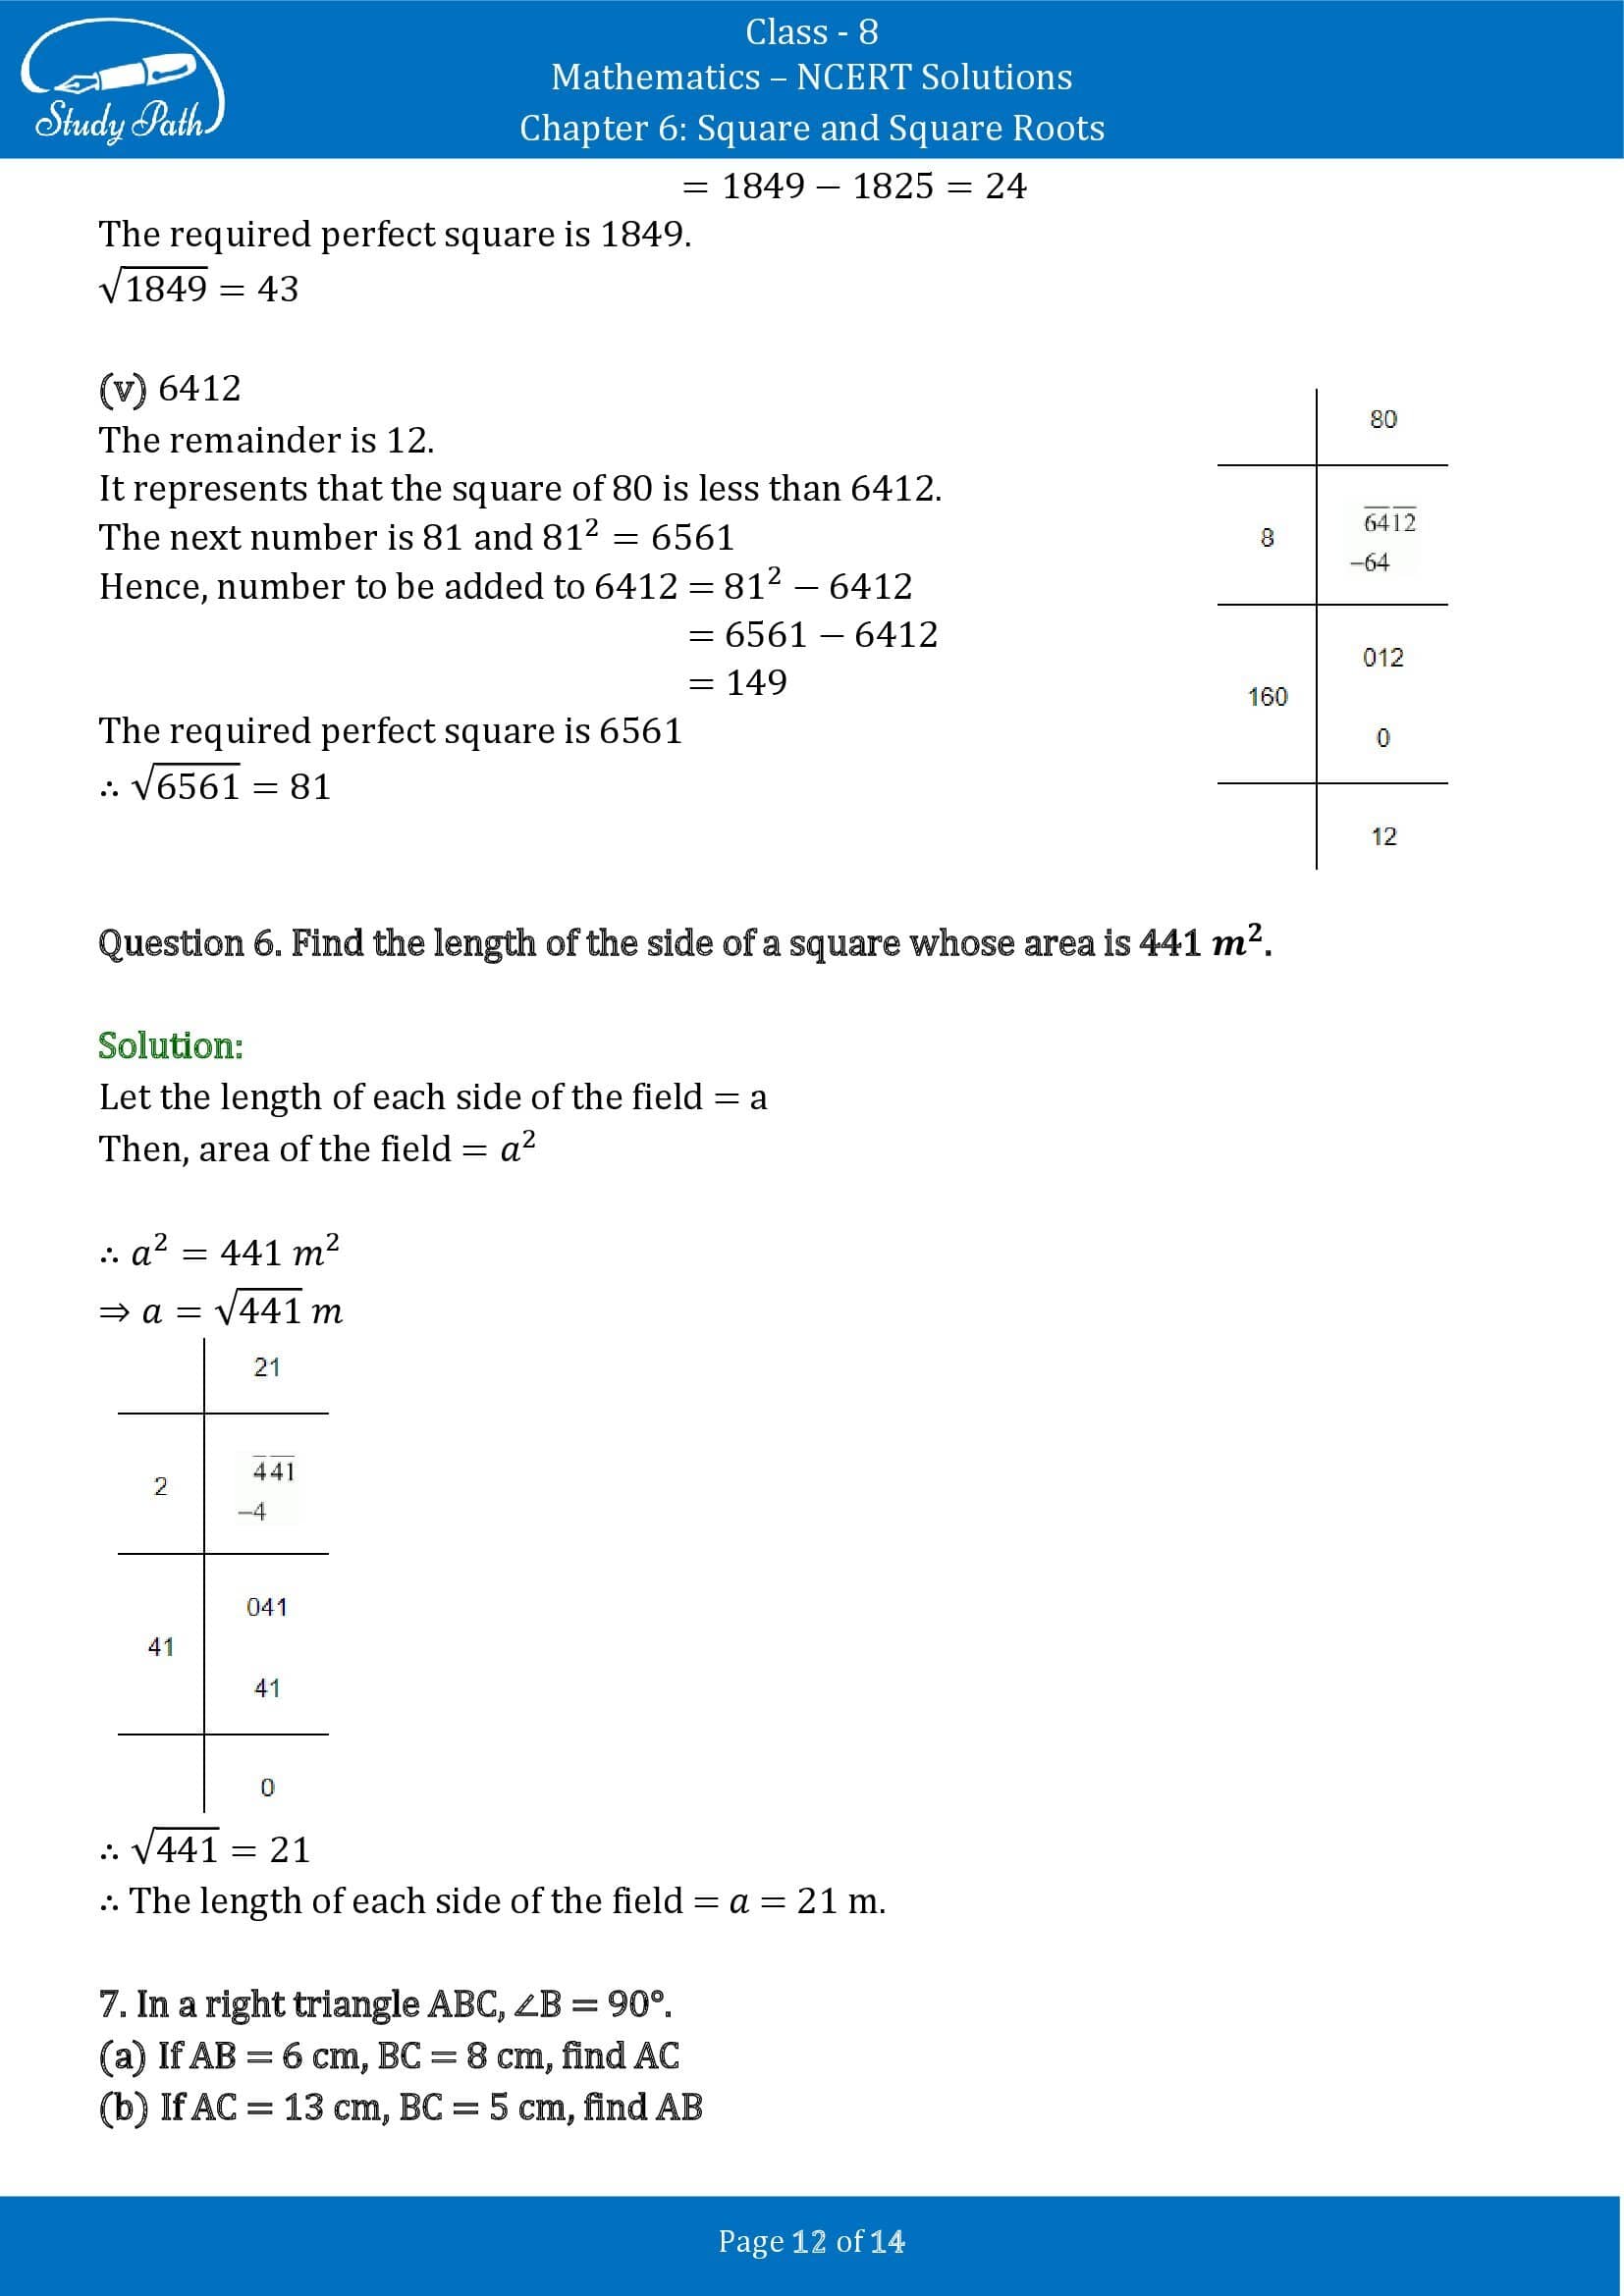 NCERT Solutions for Class 8 Maths Chapter 6 Square and Square Roots Exercise 6.4 00012